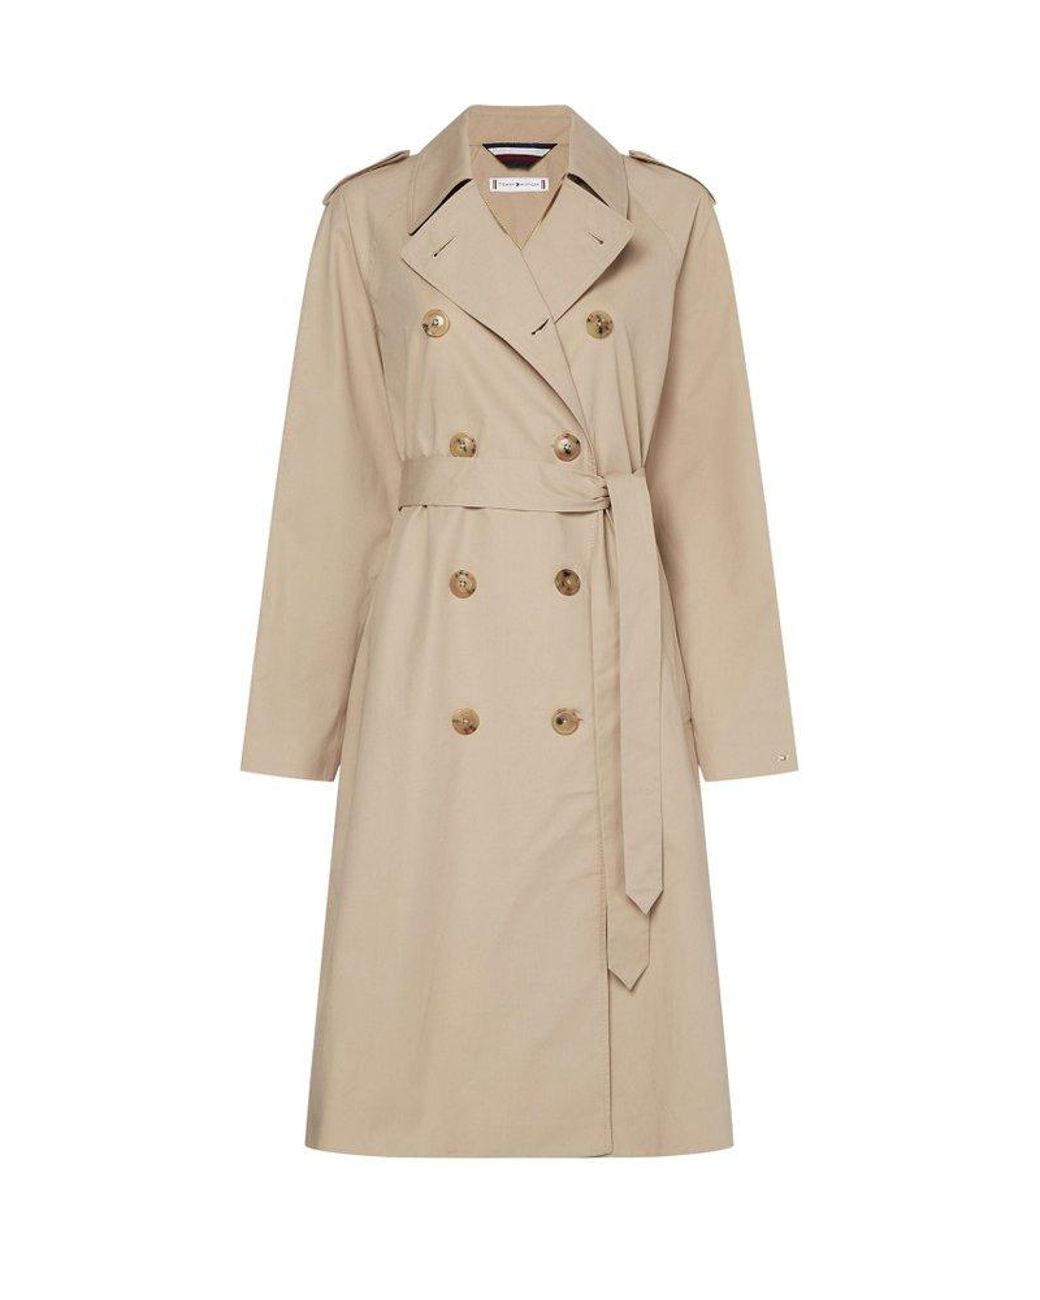 Hilfiger Double-breasted Belted Trench Coat in Canada